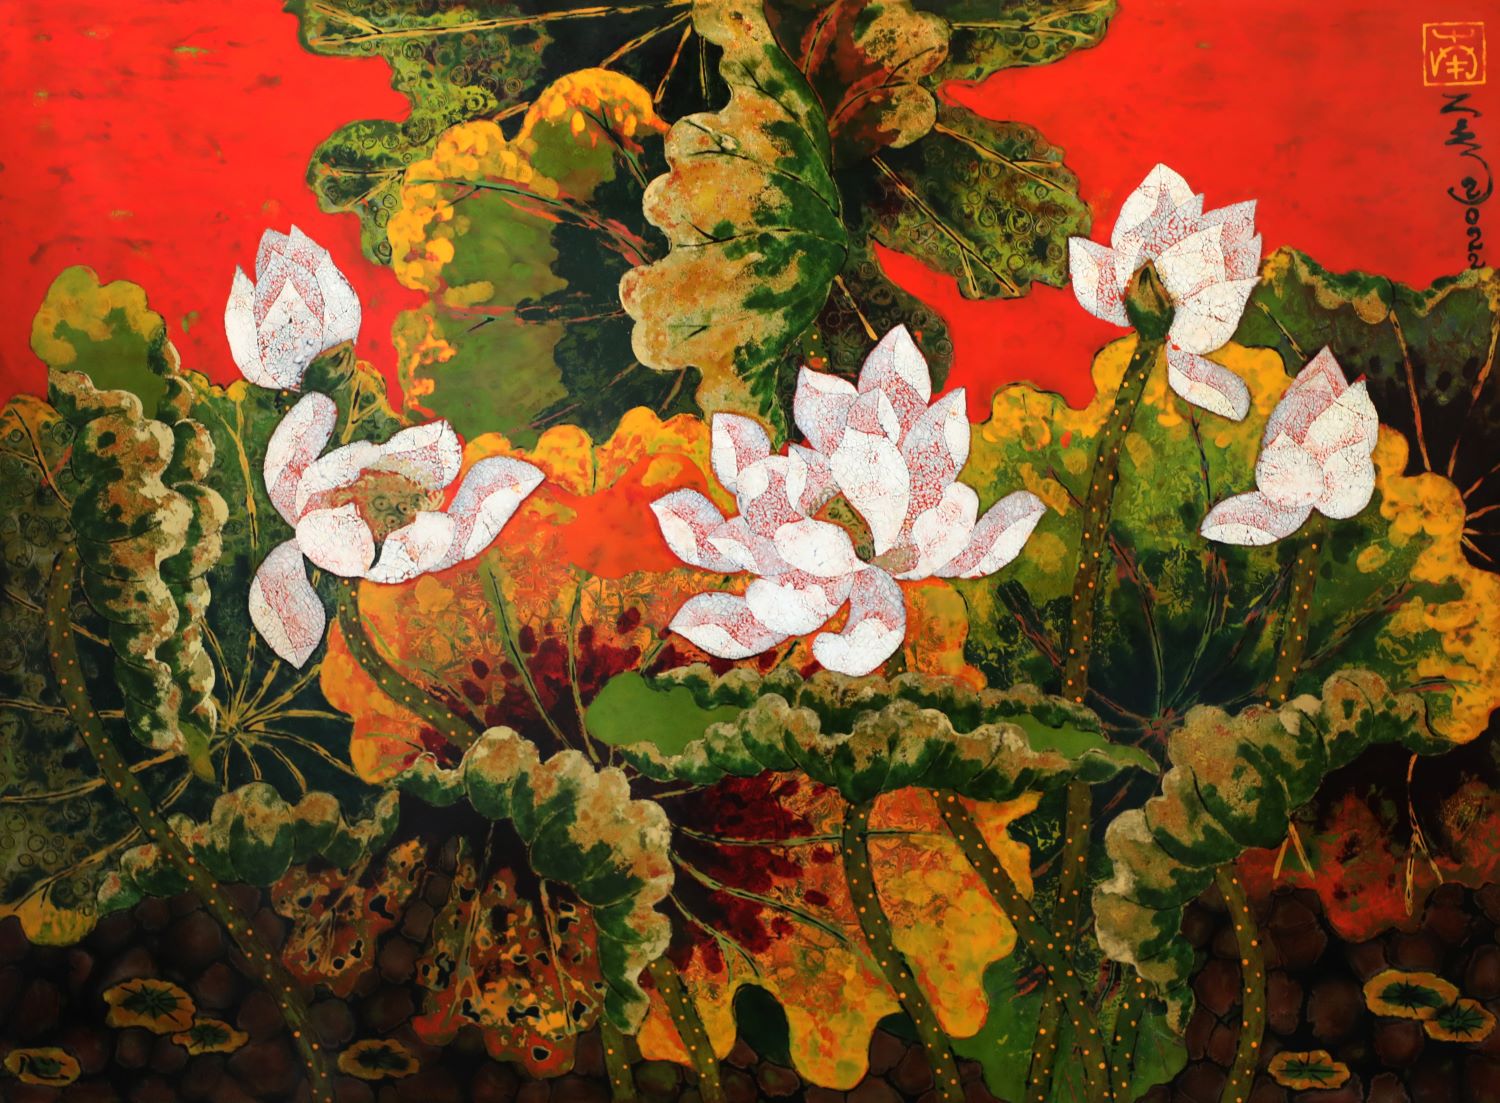 Lotus III - Vietnamese Lacquer Painting by Artist Tran Thieu Nam